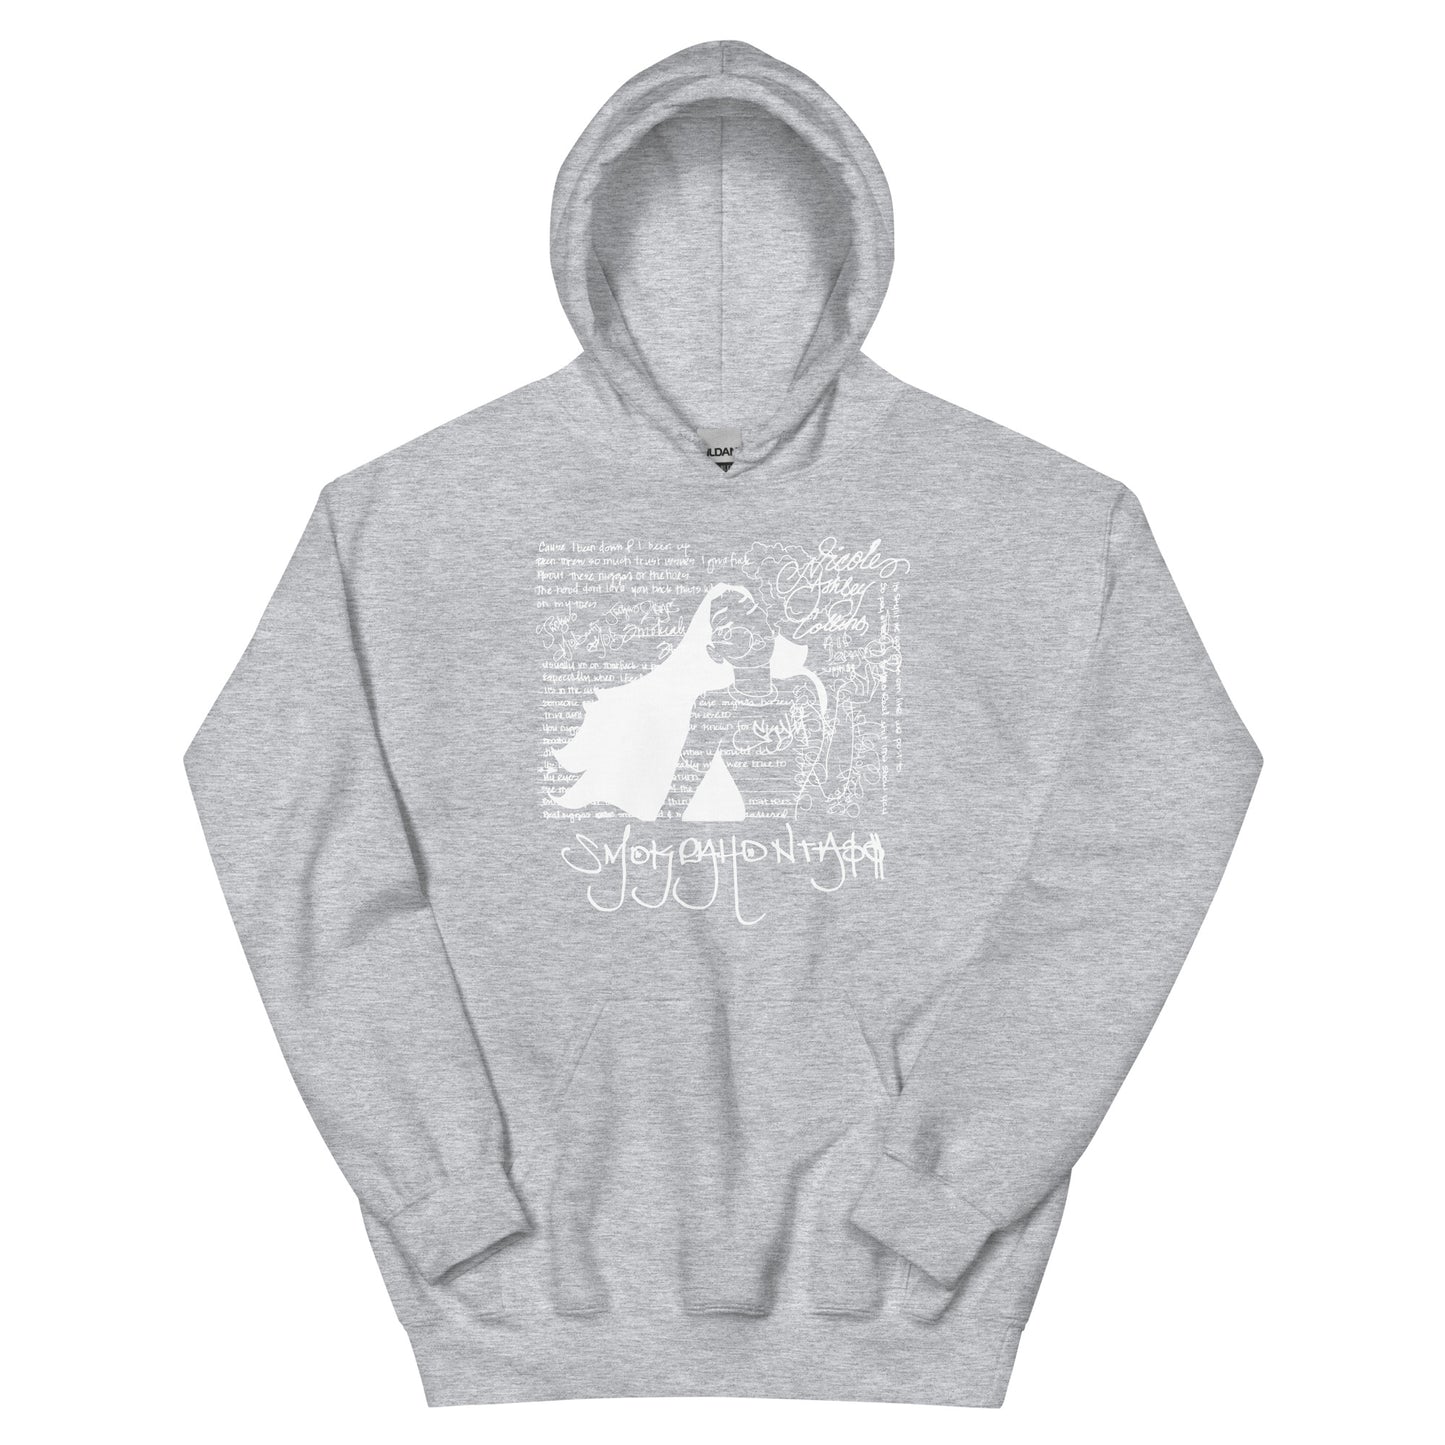 Smokeahontass Rhymebook Hoodie With White